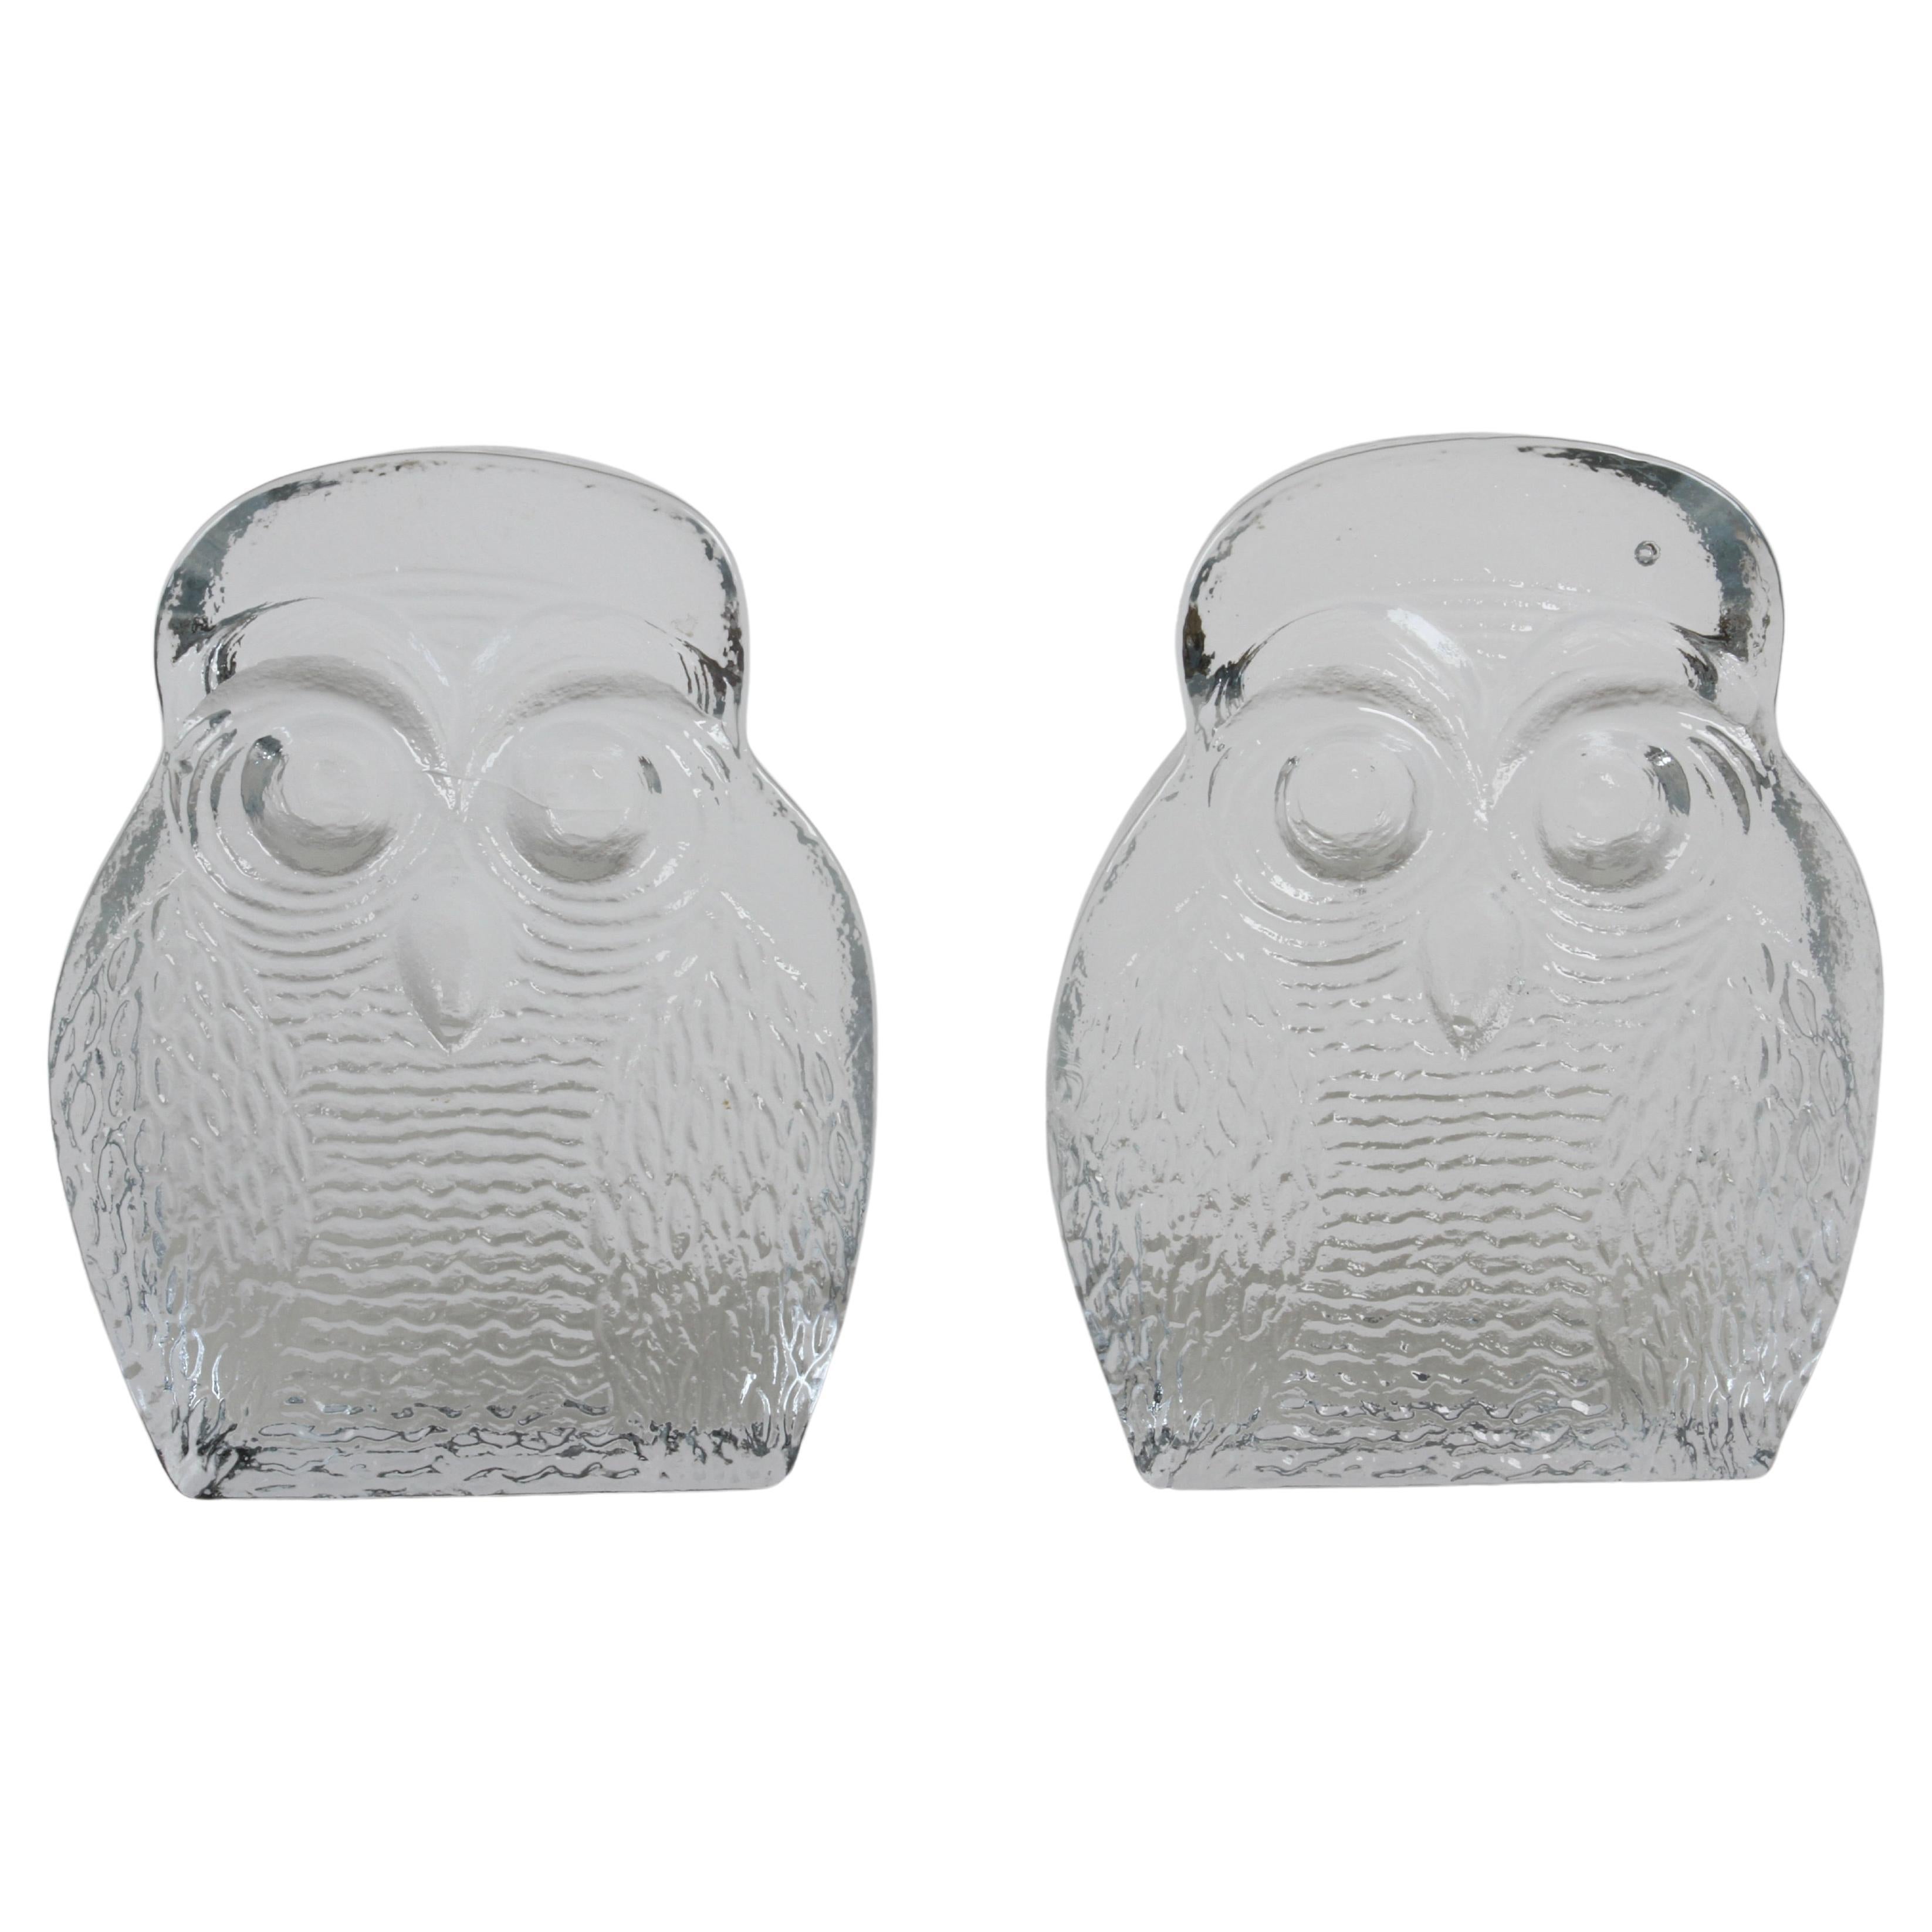 Mid-Century Modern Blenko Clear Textured Glass "Owl" Bookends by Wayne Husted